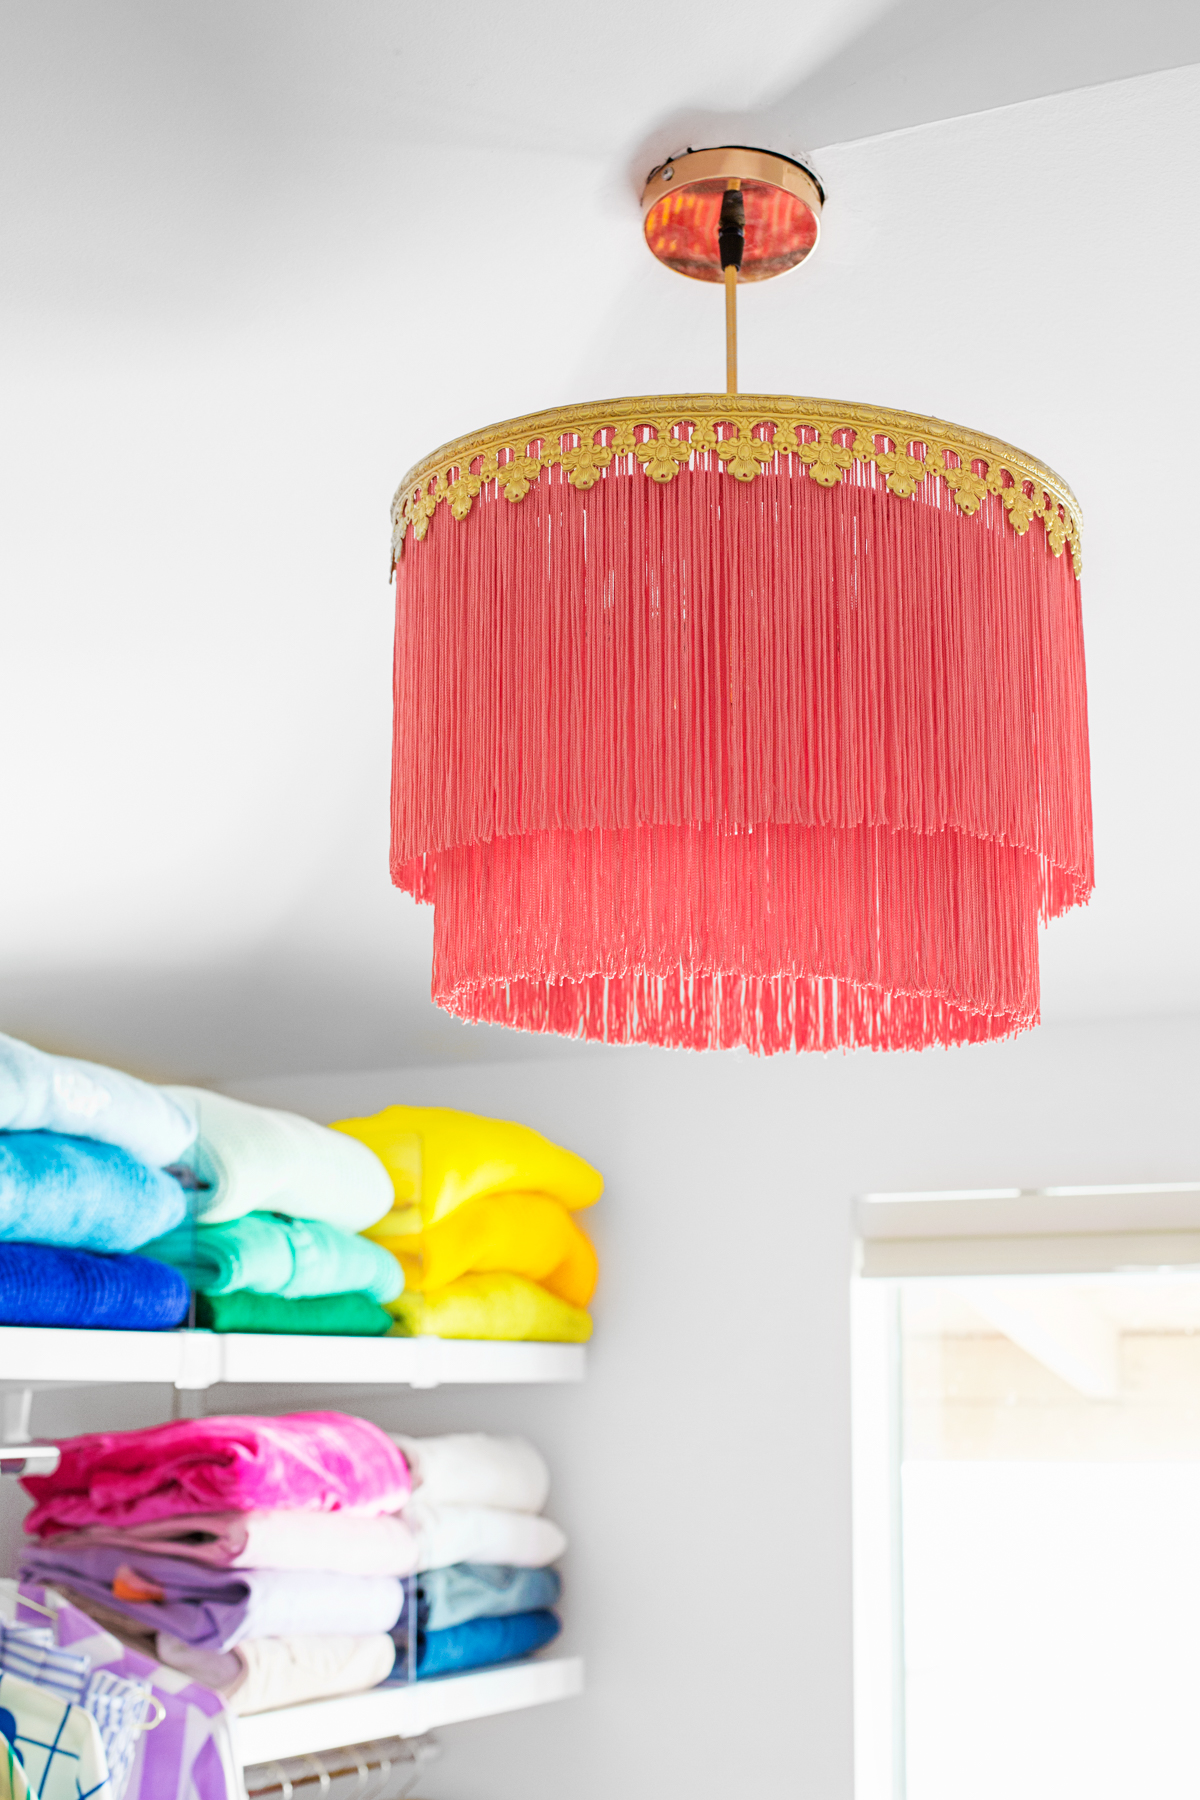 How To Make A Fringe Chandelier, How To Make A Tassel Lampshade